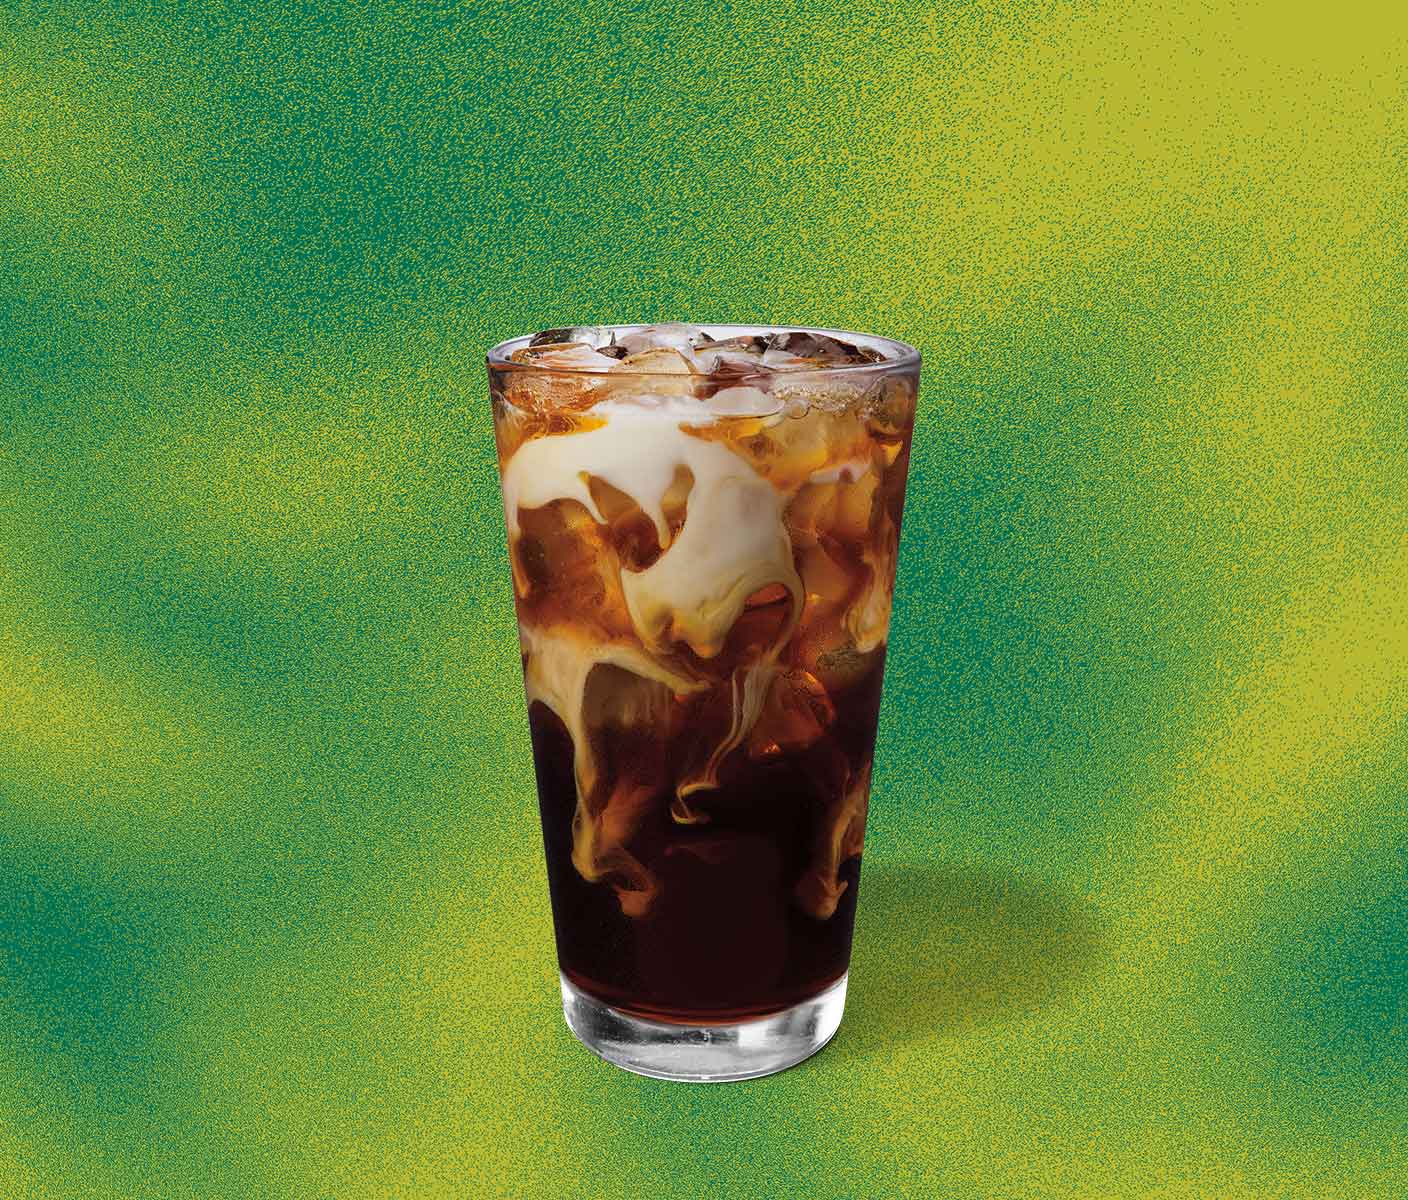 Cold coffee with creamy marbling in a tall glass.